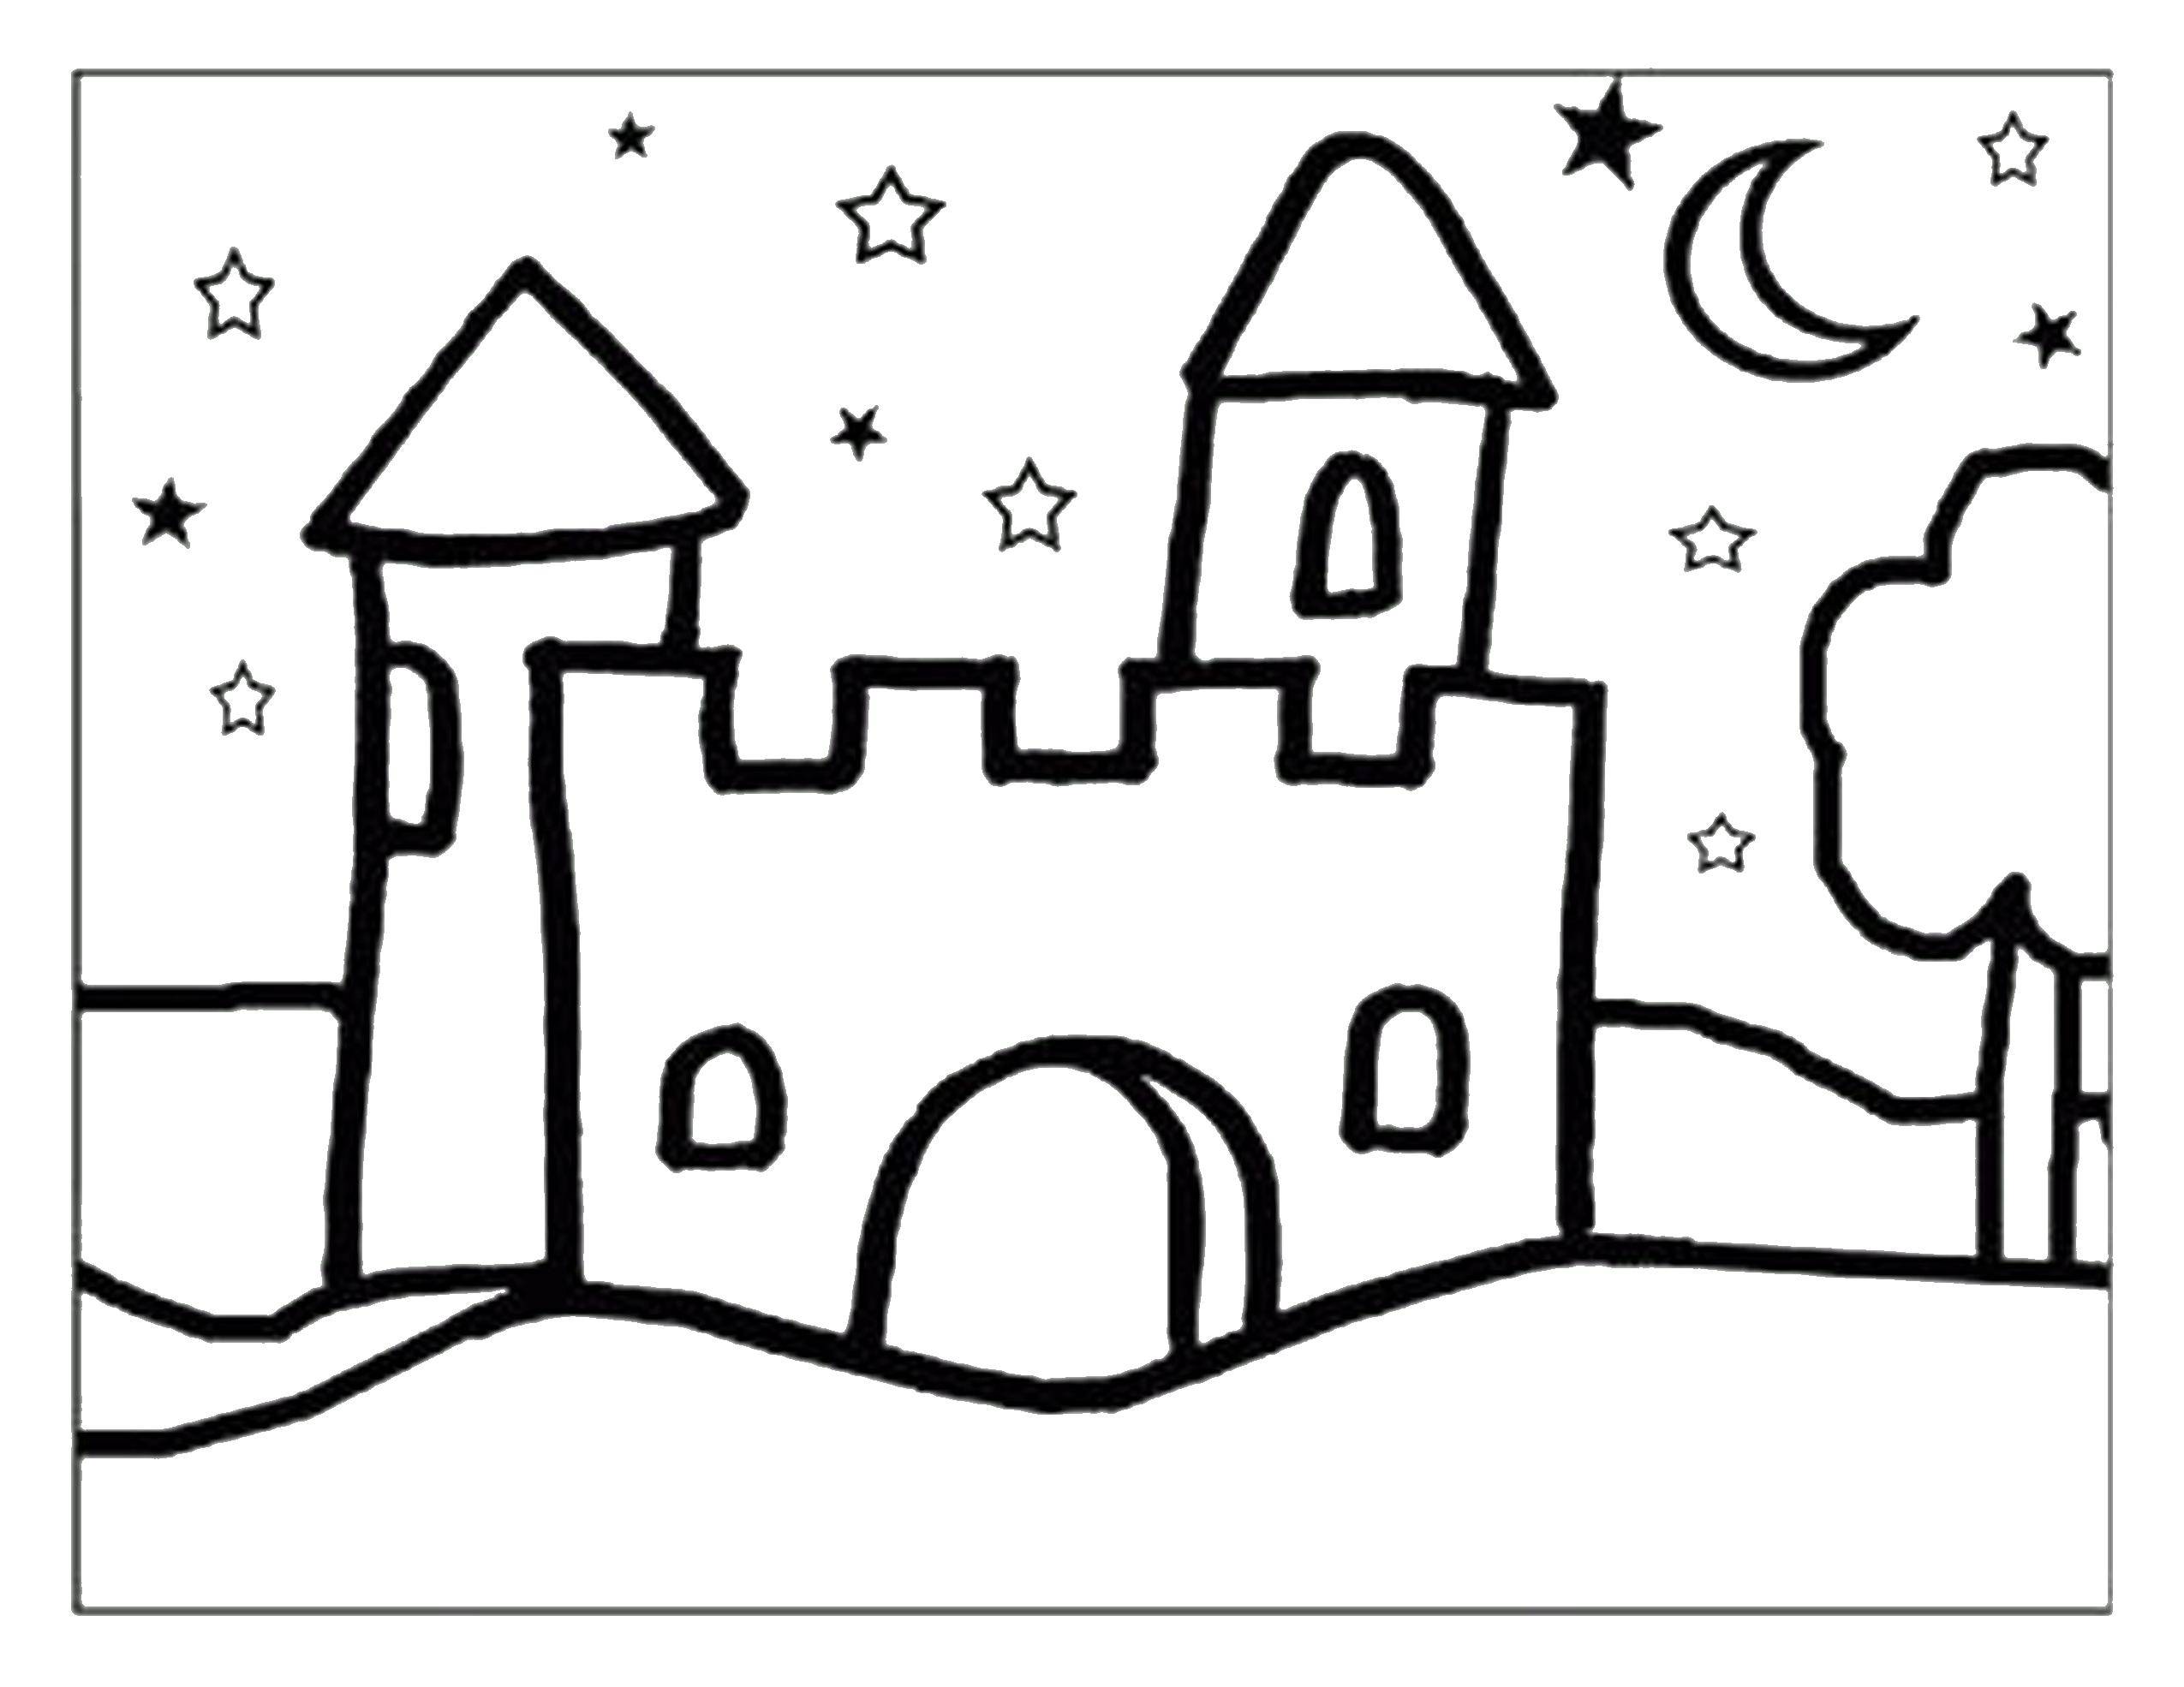 Coloring Castle. Category locks . Tags:  castle, night, building.